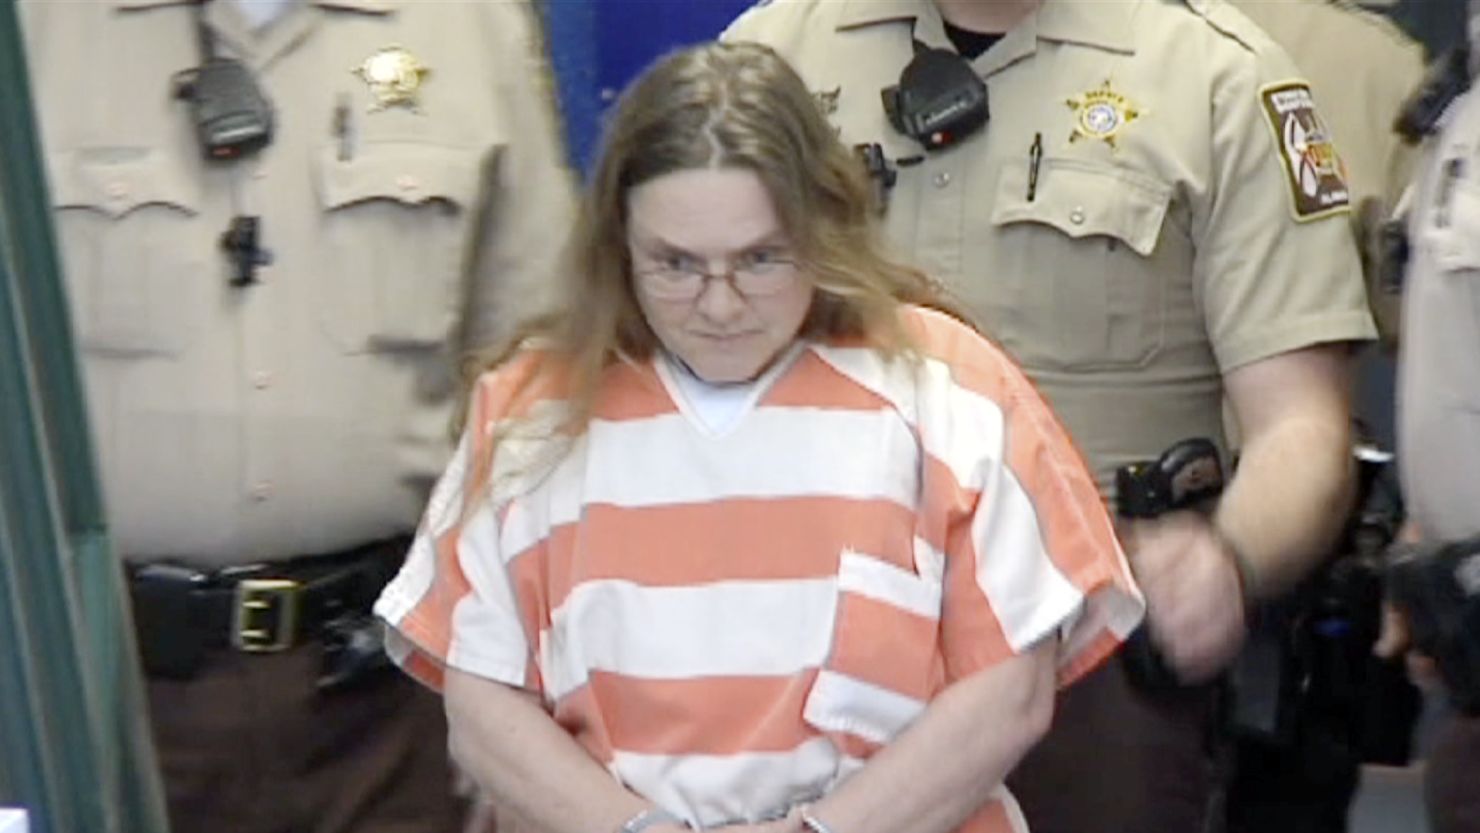 Joyce Garrard was sentenced to life without parole for the 2012 death of her granddaughter, Savannah Hardin. 